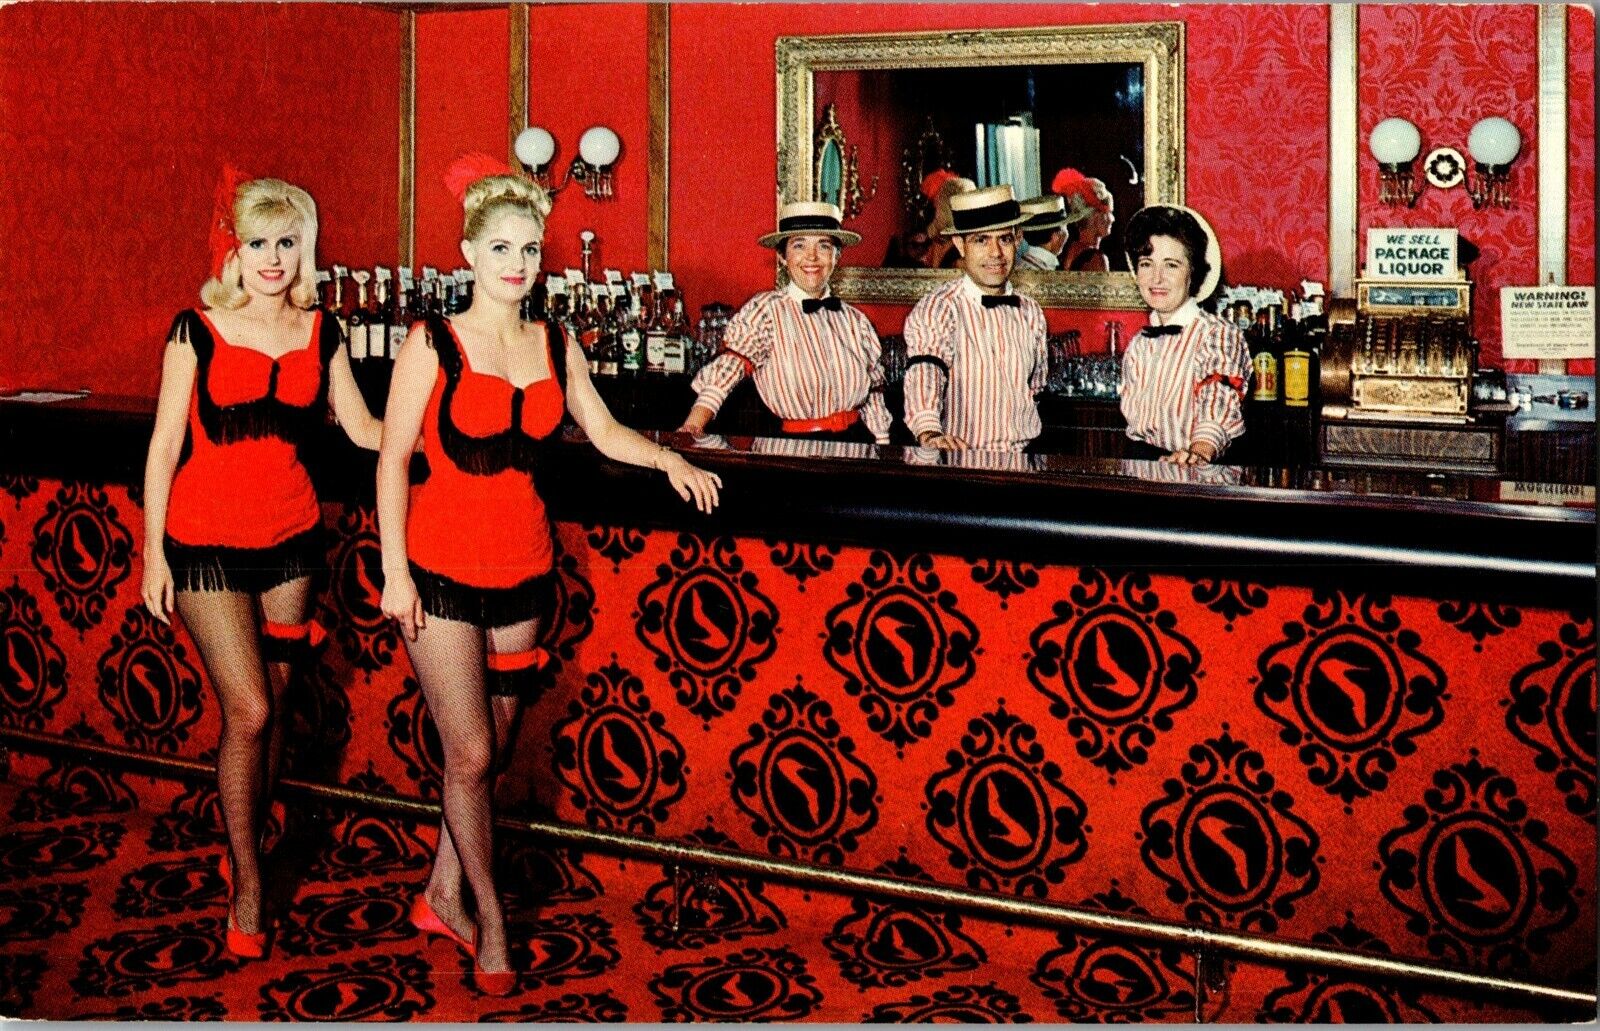 Red Slipper Cocktail Lounge, Holiday Inn Springfield MO Vintage Postcard H60